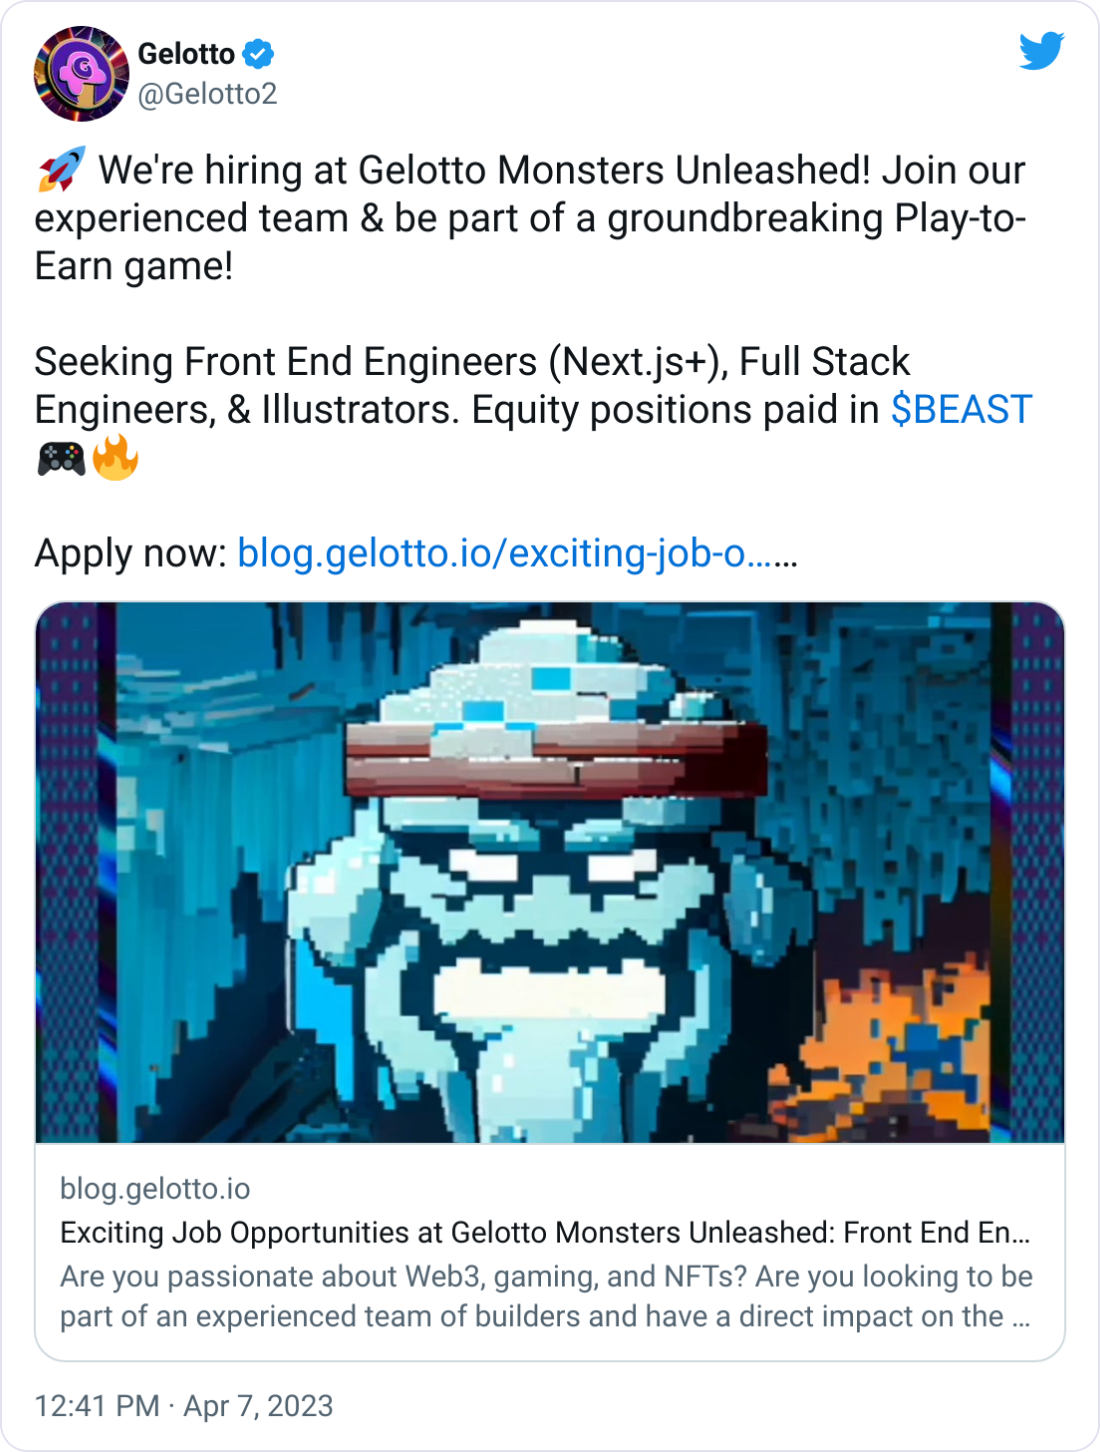 🚀 We're hiring at Gelotto Monsters Unleashed! Join our experienced team & be part of a groundbreaking Play-to-Earn game!   Seeking Front End Engineers (Next.js+), Full Stack Engineers, & Illustrators. Equity positions paid in $BEAST 🎮🔥  Apply now: https://blog.gelotto.io/exciting-job-opportunities-at-gelotto-monsters-unleashed-front-end-engineer-full-stack-engineer-and-illustrator  #Web3 #NFT #GamingJobs #P2E